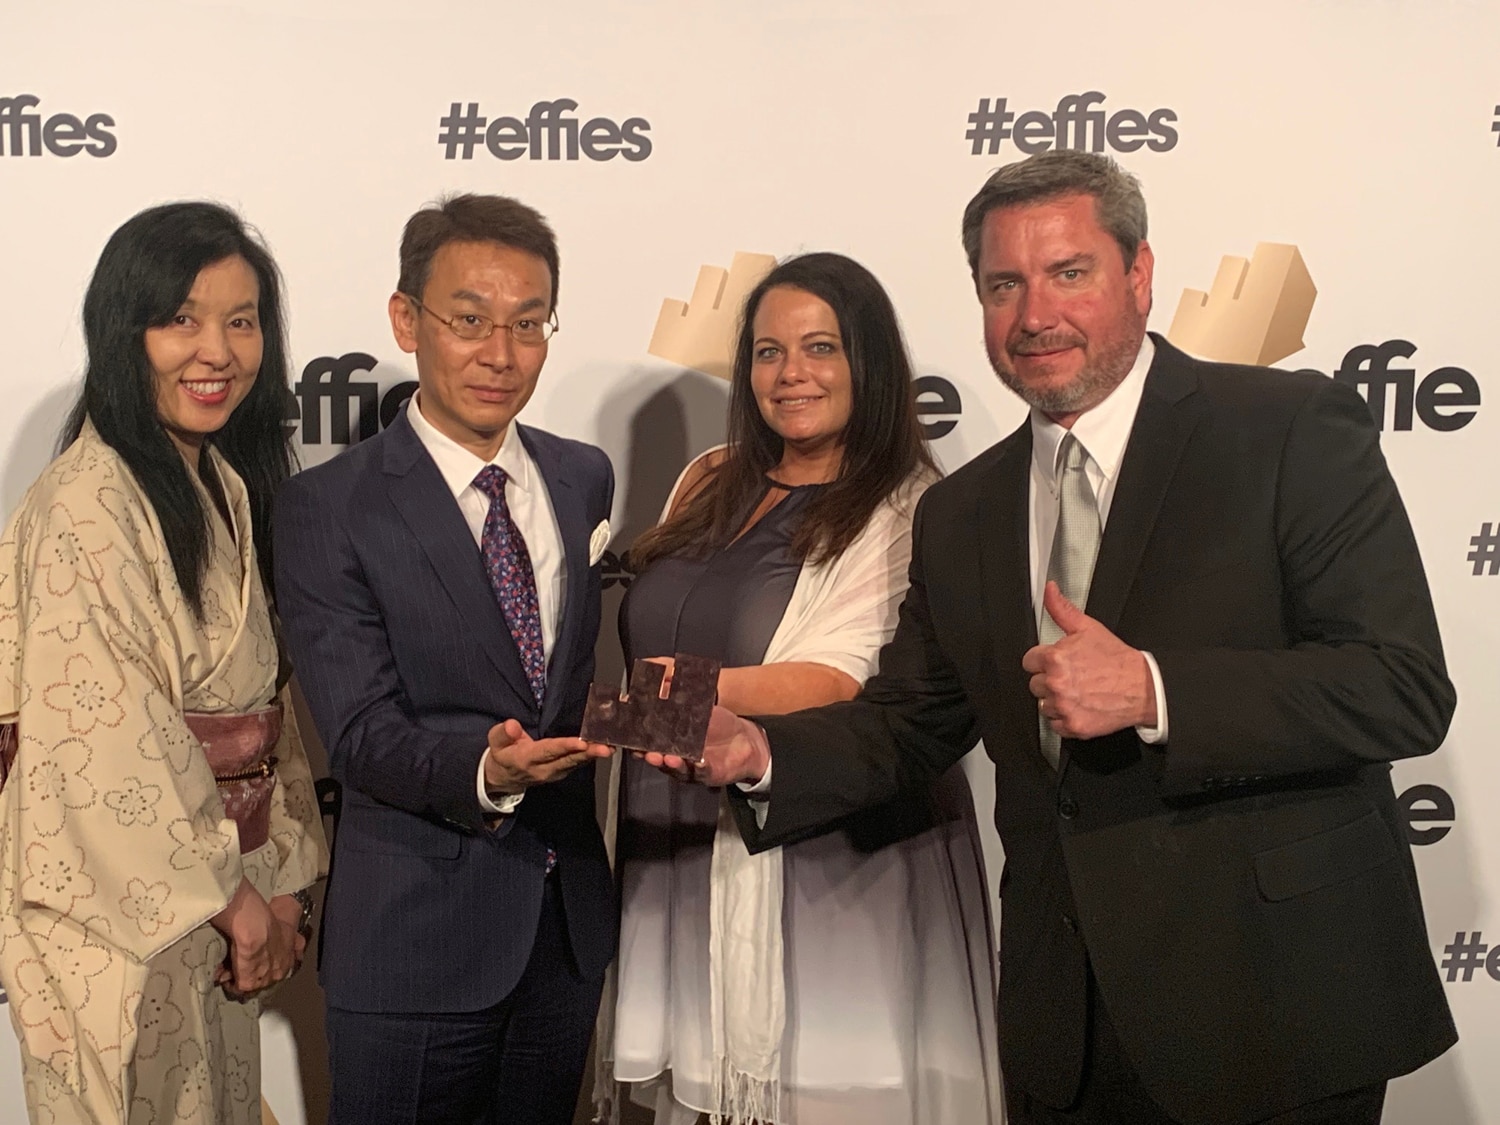 Effie Awards Ceremony (Local time on 30th May, 2019: In New York･Effie US GALA)